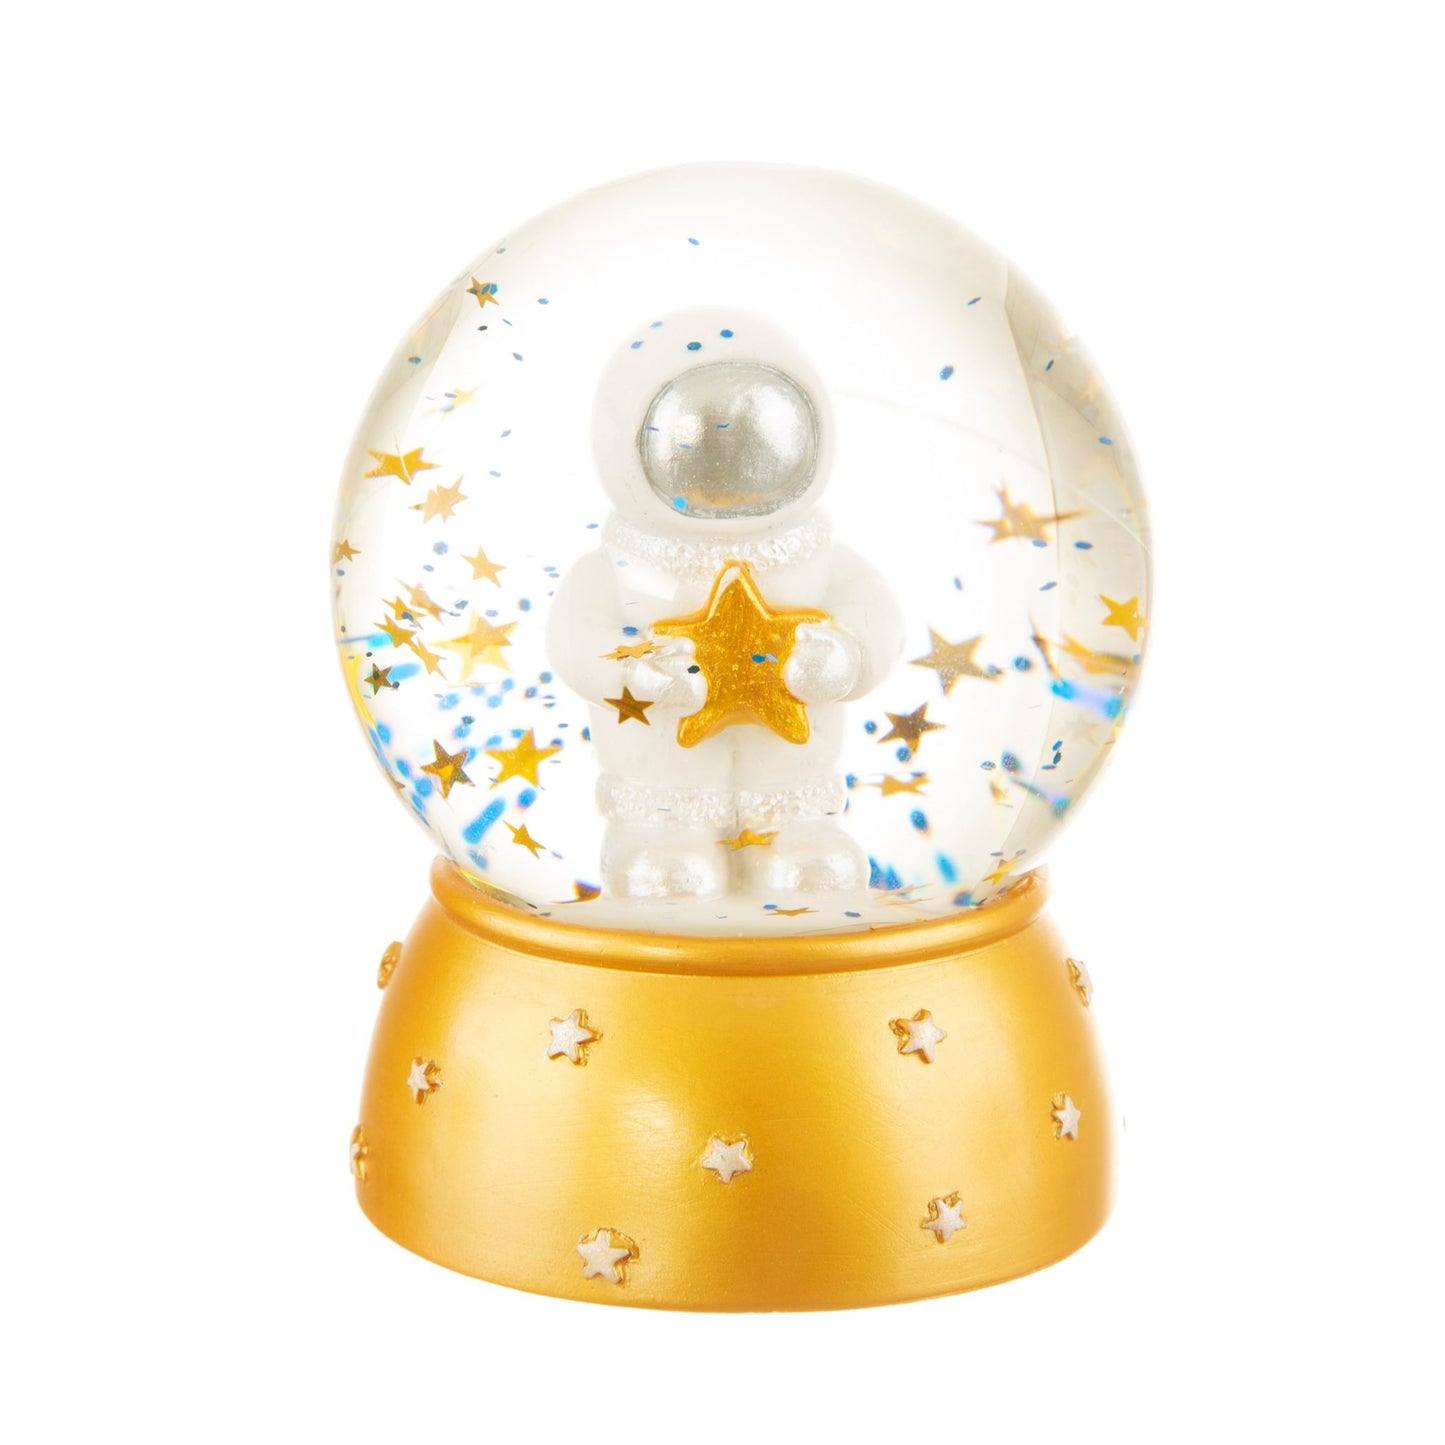 Outer Space Astronaut Snow Globe